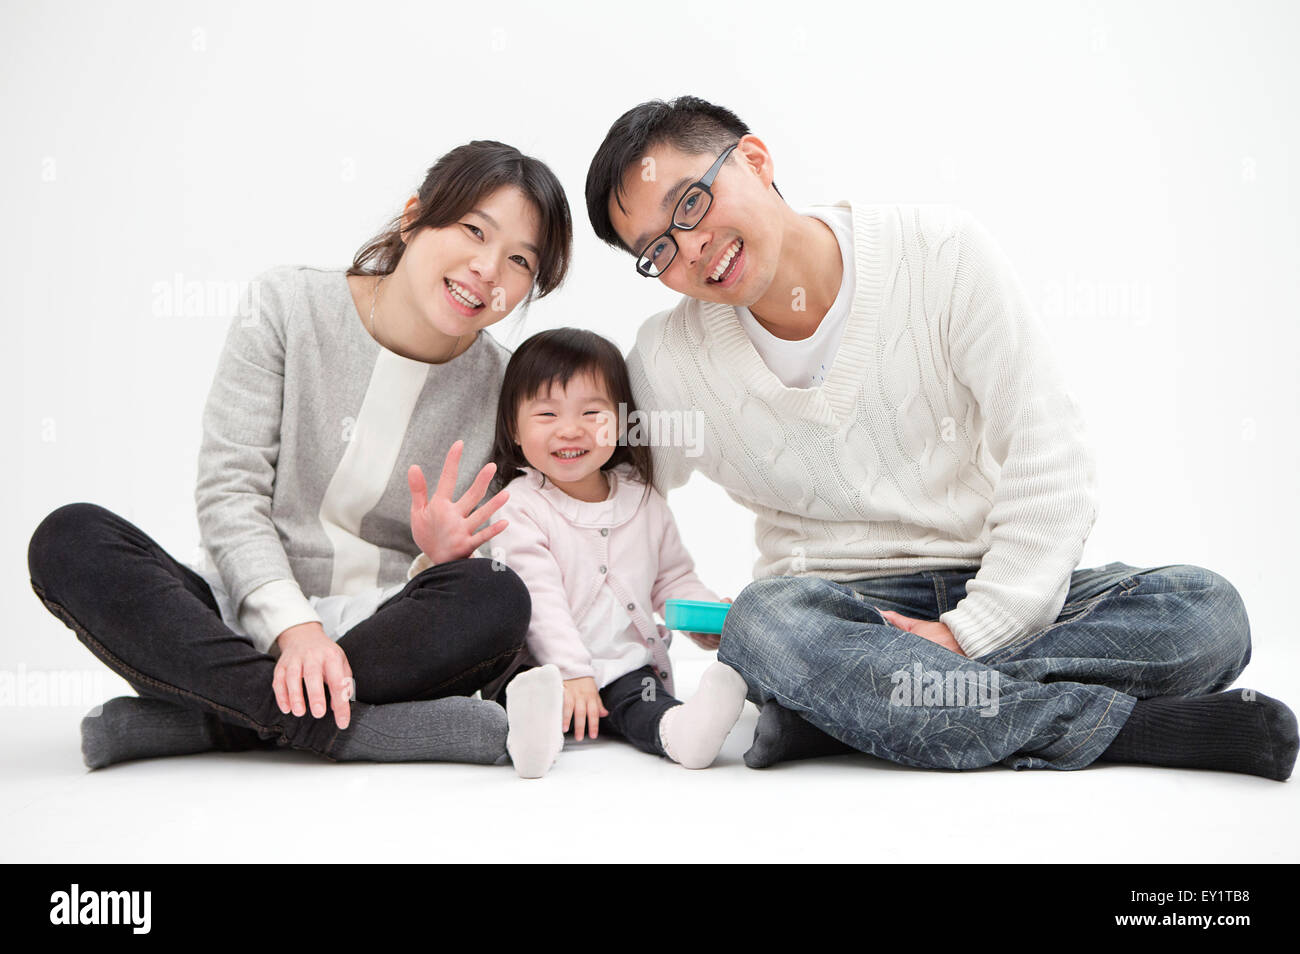 Family with one child sitting and smiling at the camera together, Stock Photo